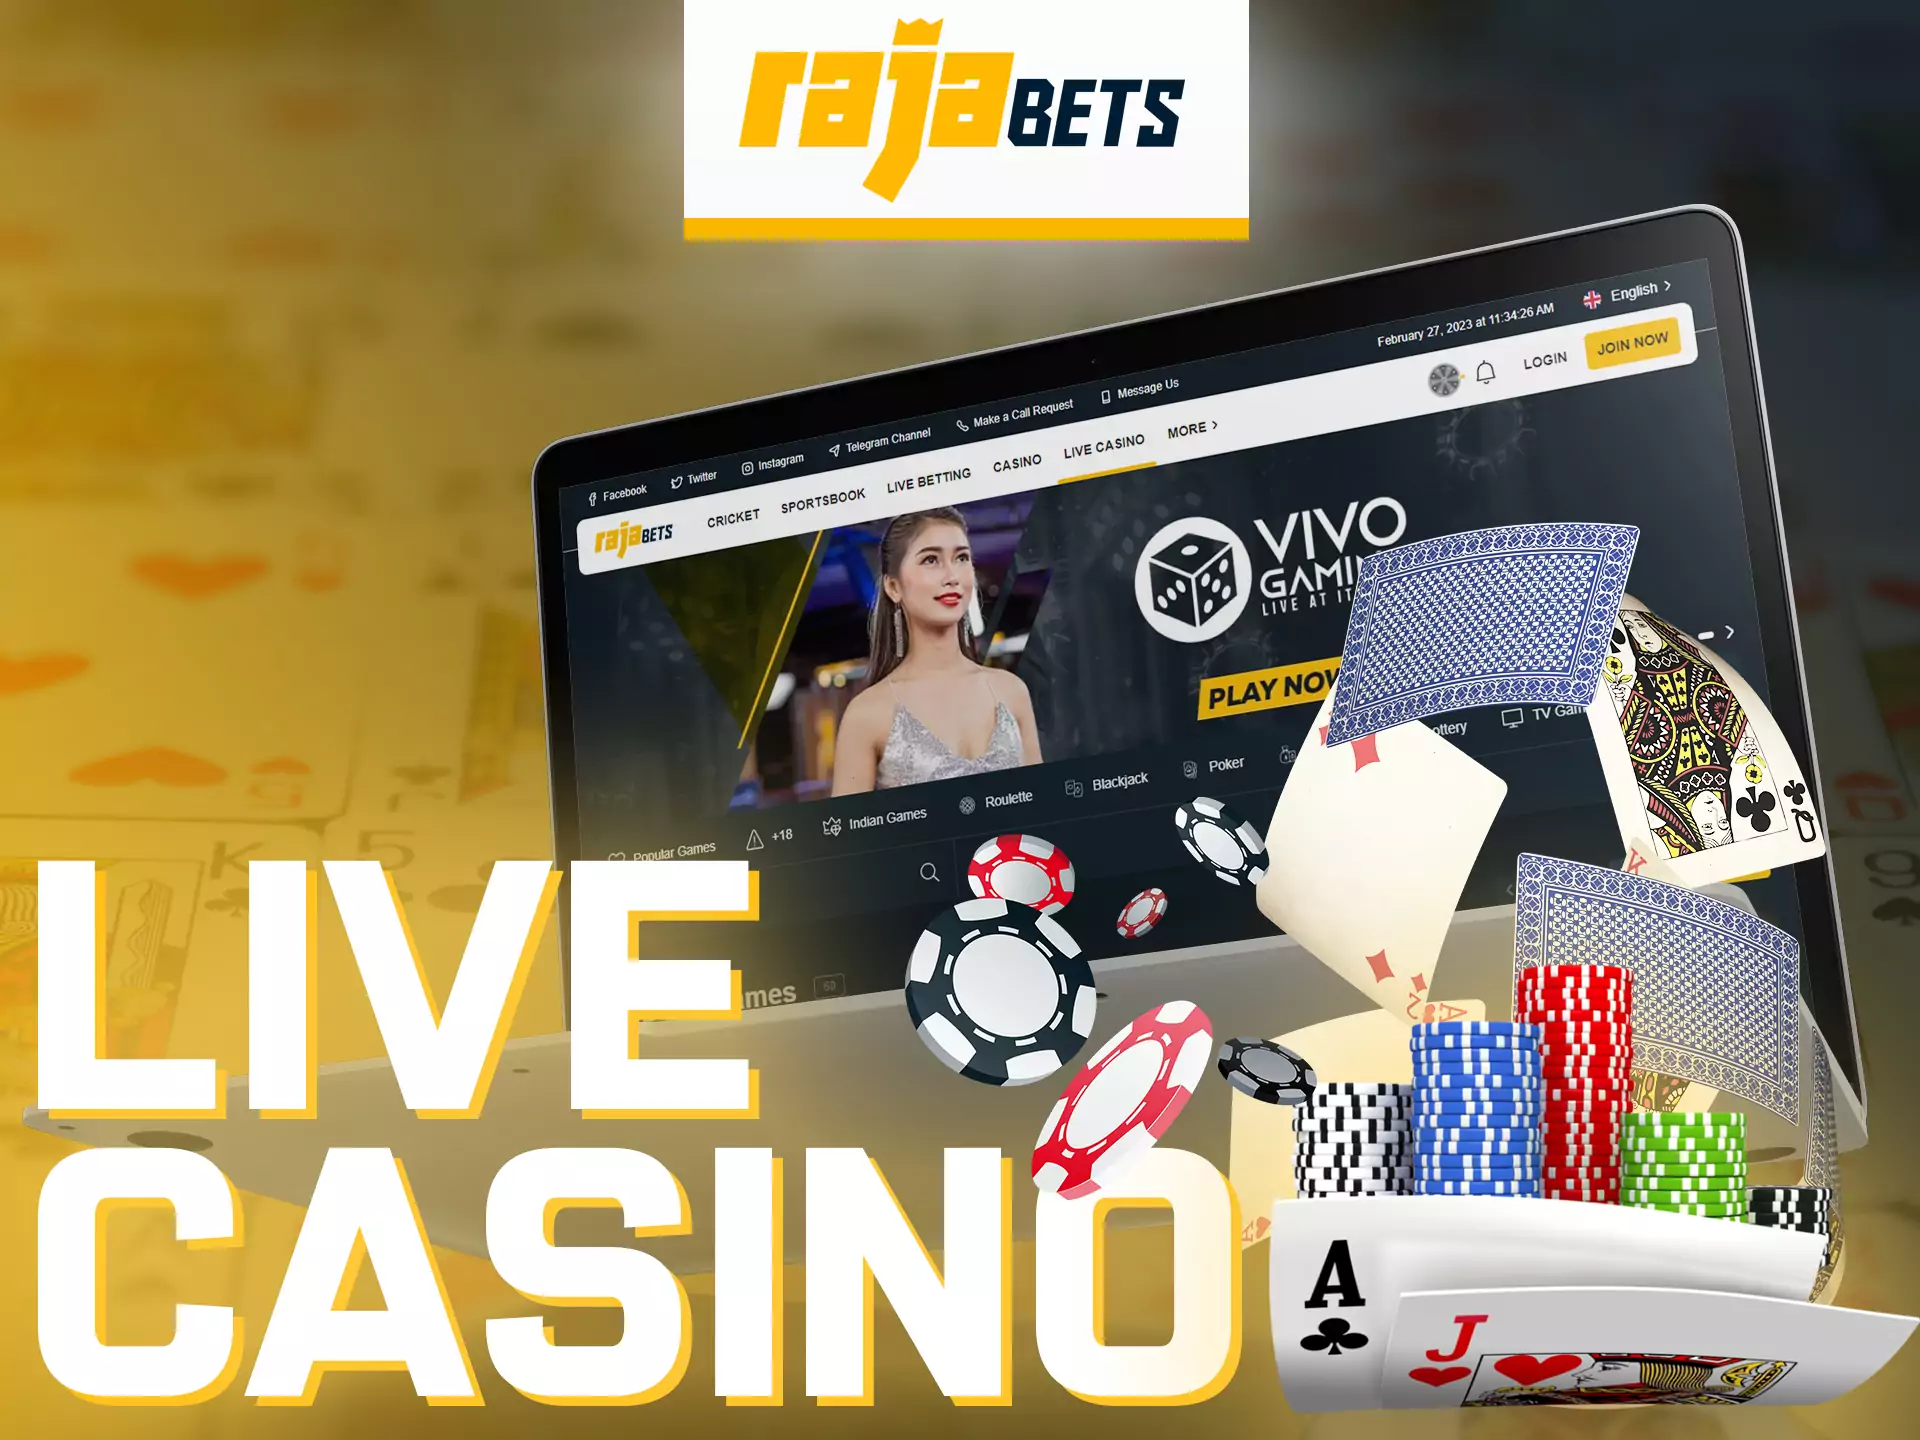 At Rajabets you can play your favorite live casino games.